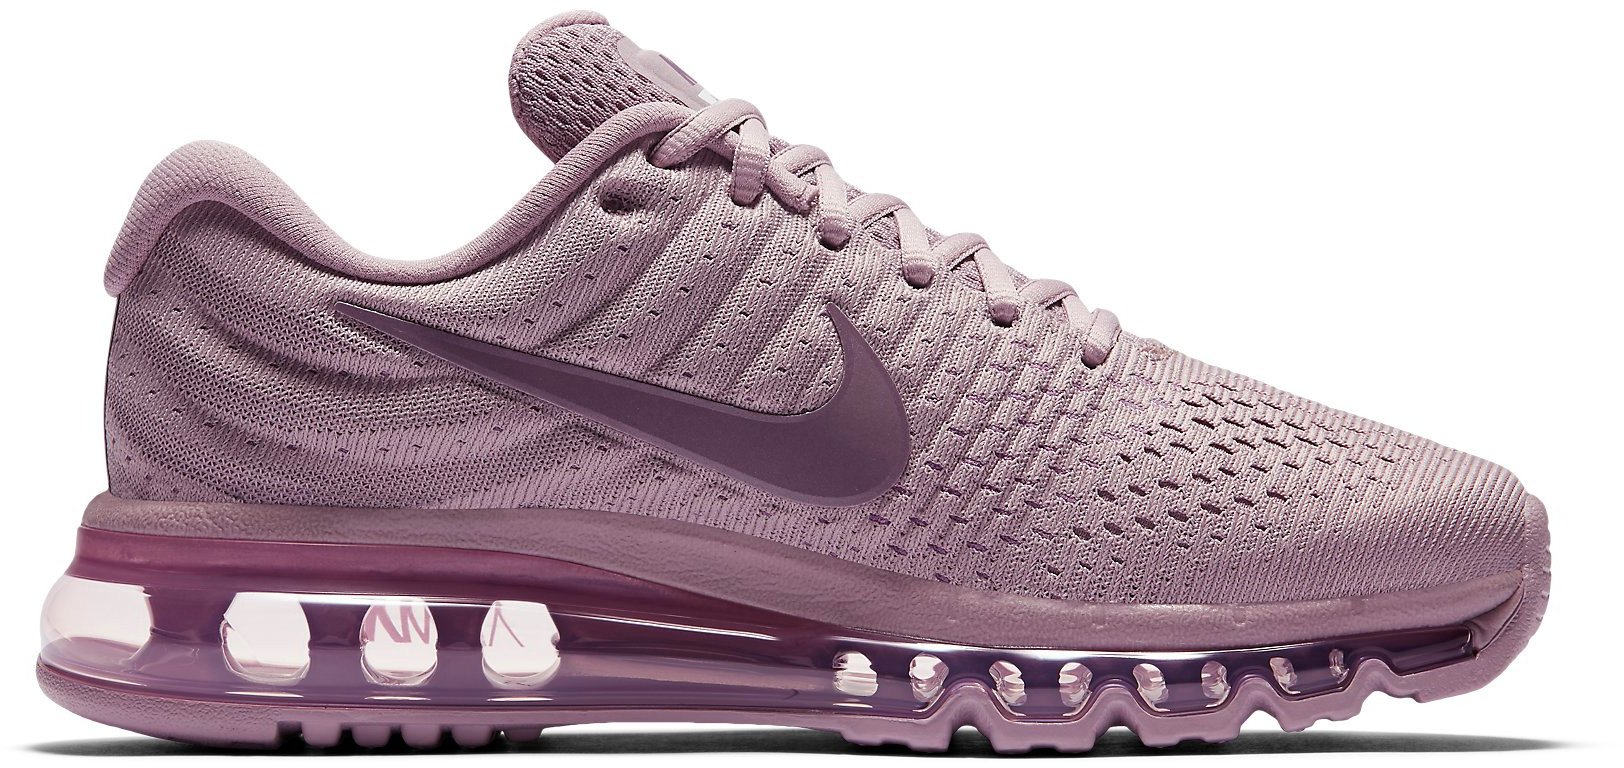 Running shoes Nike WMNS Air Max 2017 